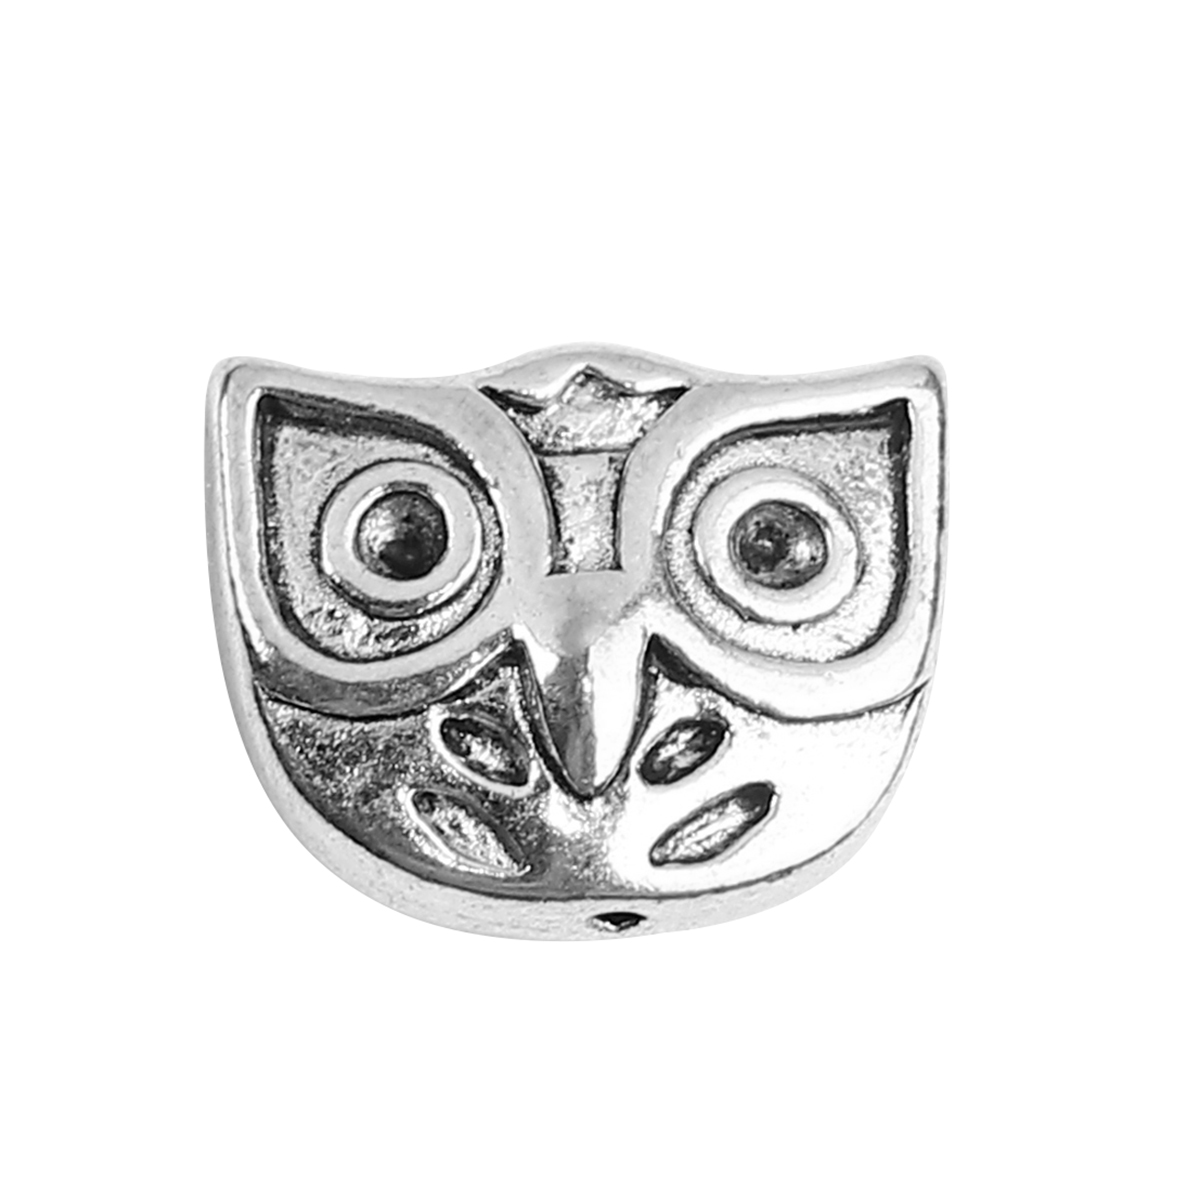 Picture of Zinc Based Alloy Spacer Beads Owl Animal Antique Silver (Can Hold ss5 Rhinestone) 15mm x 11mm, Hole: Approx 0.8mm, 10 PCs